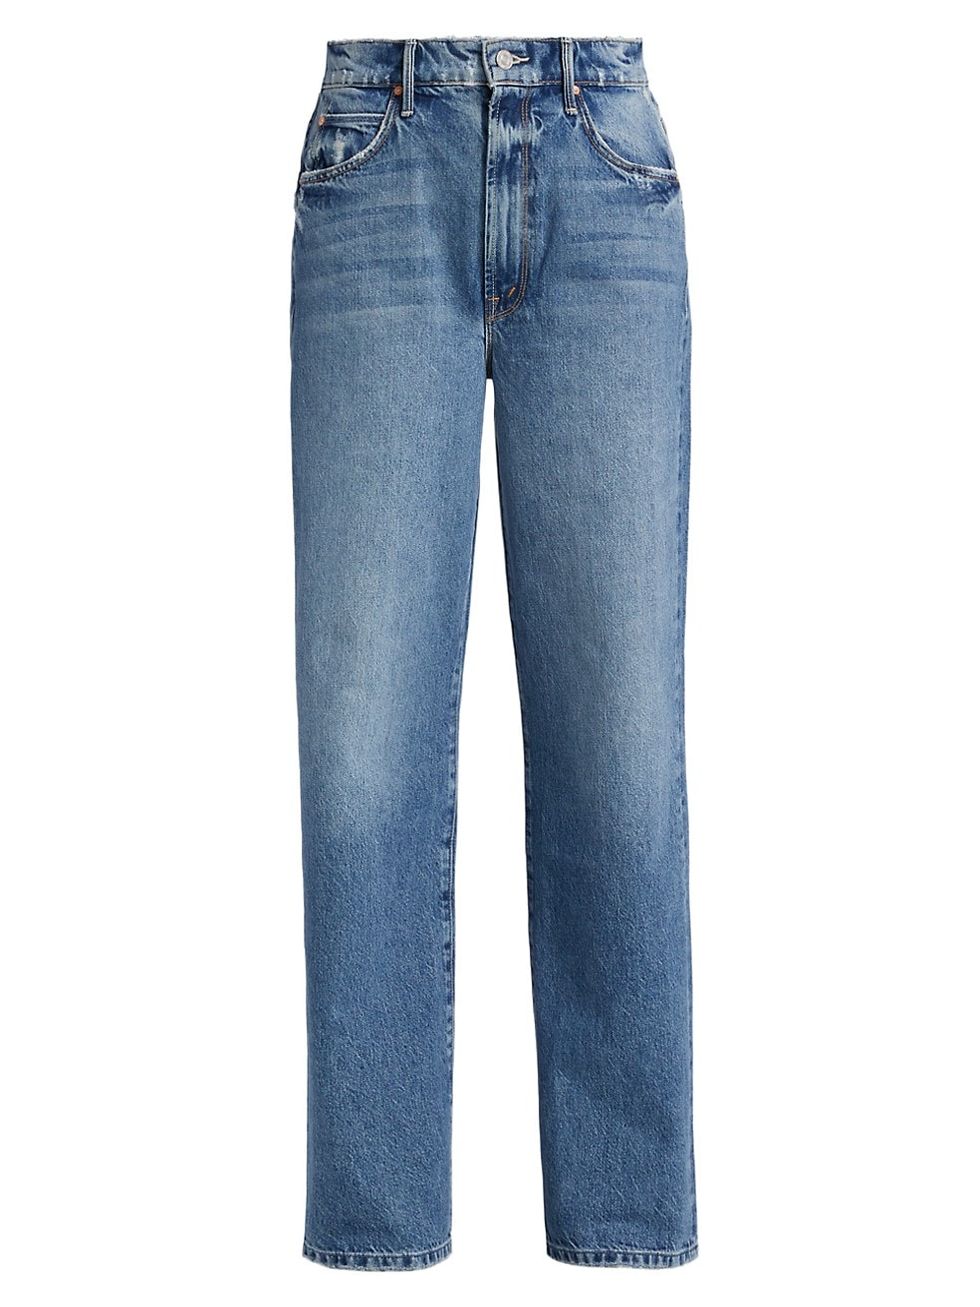 Tunnel Vision Sneak High-Waisted Jeans